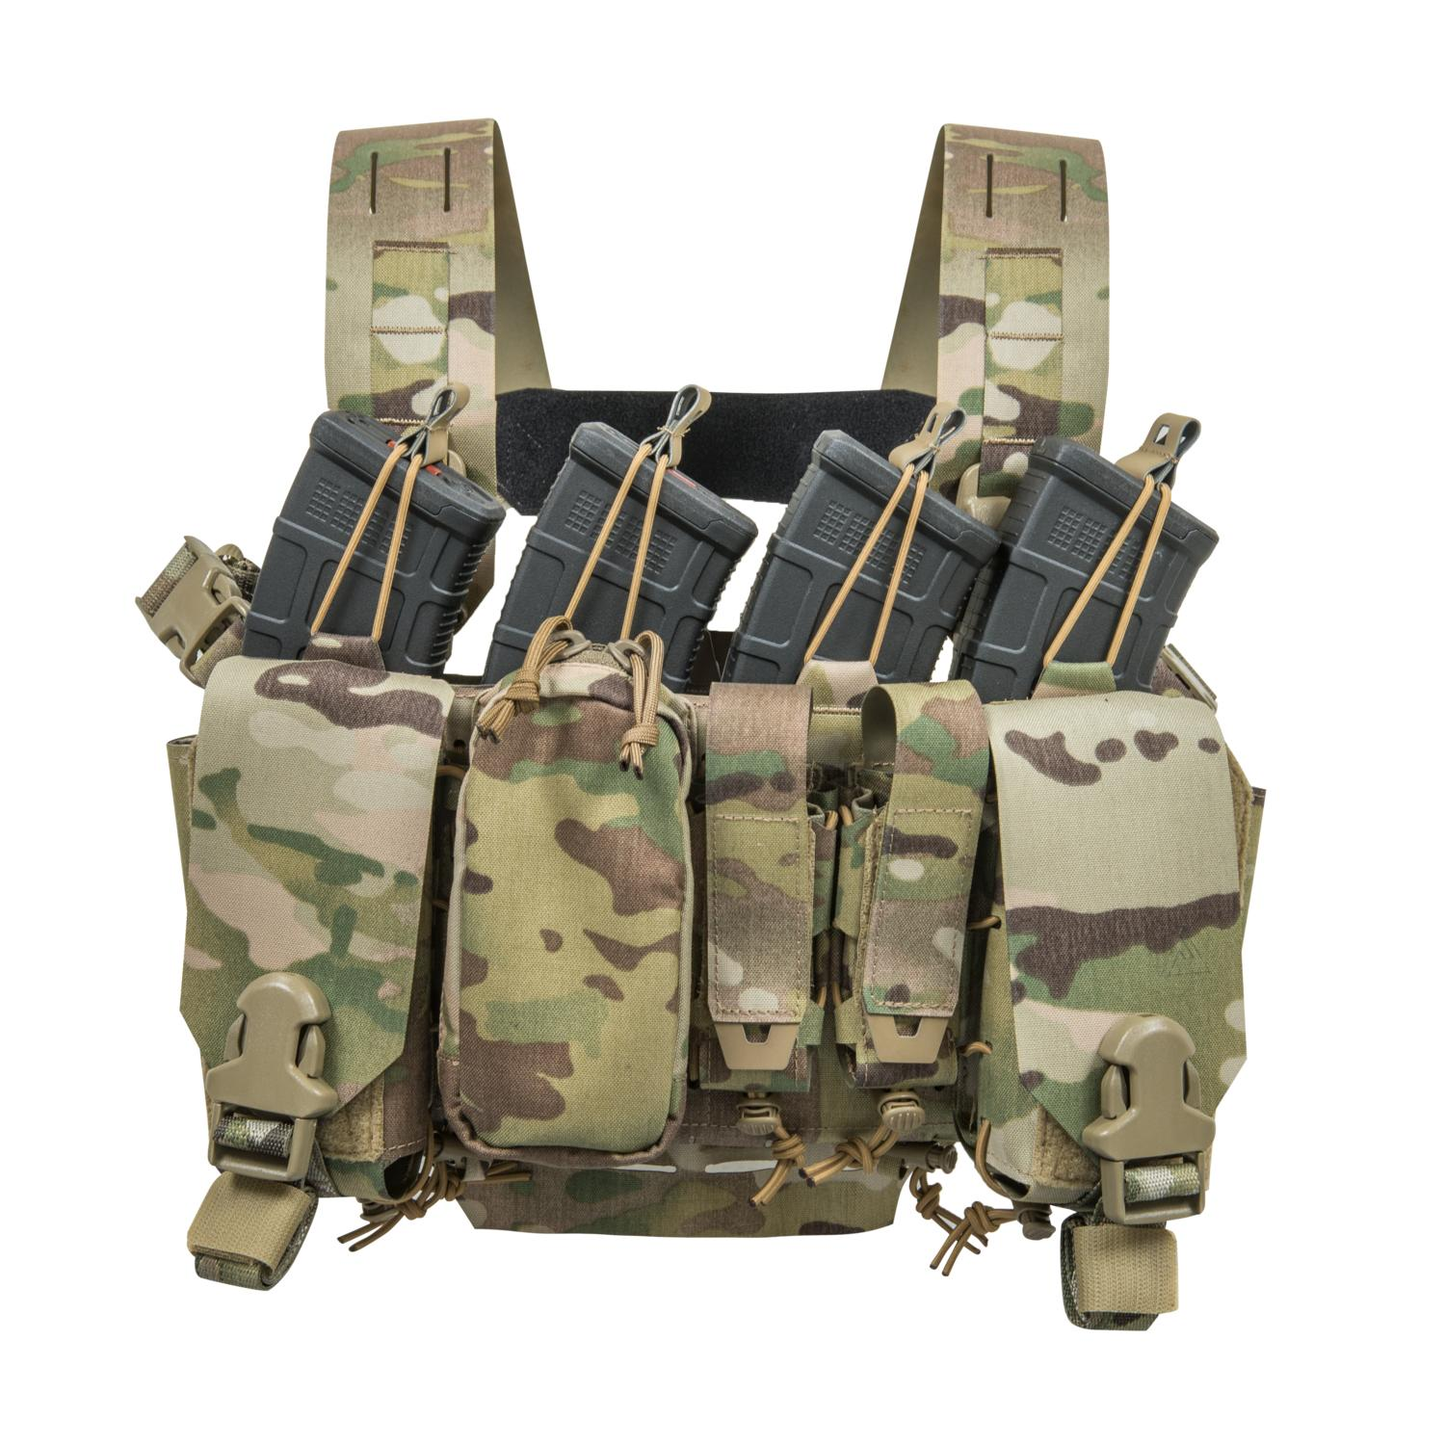 DIRECT ACTION TATTICO VEST SF THUNDERBOLT COMPACT CHEST RIG - COYOTE BROWN CB